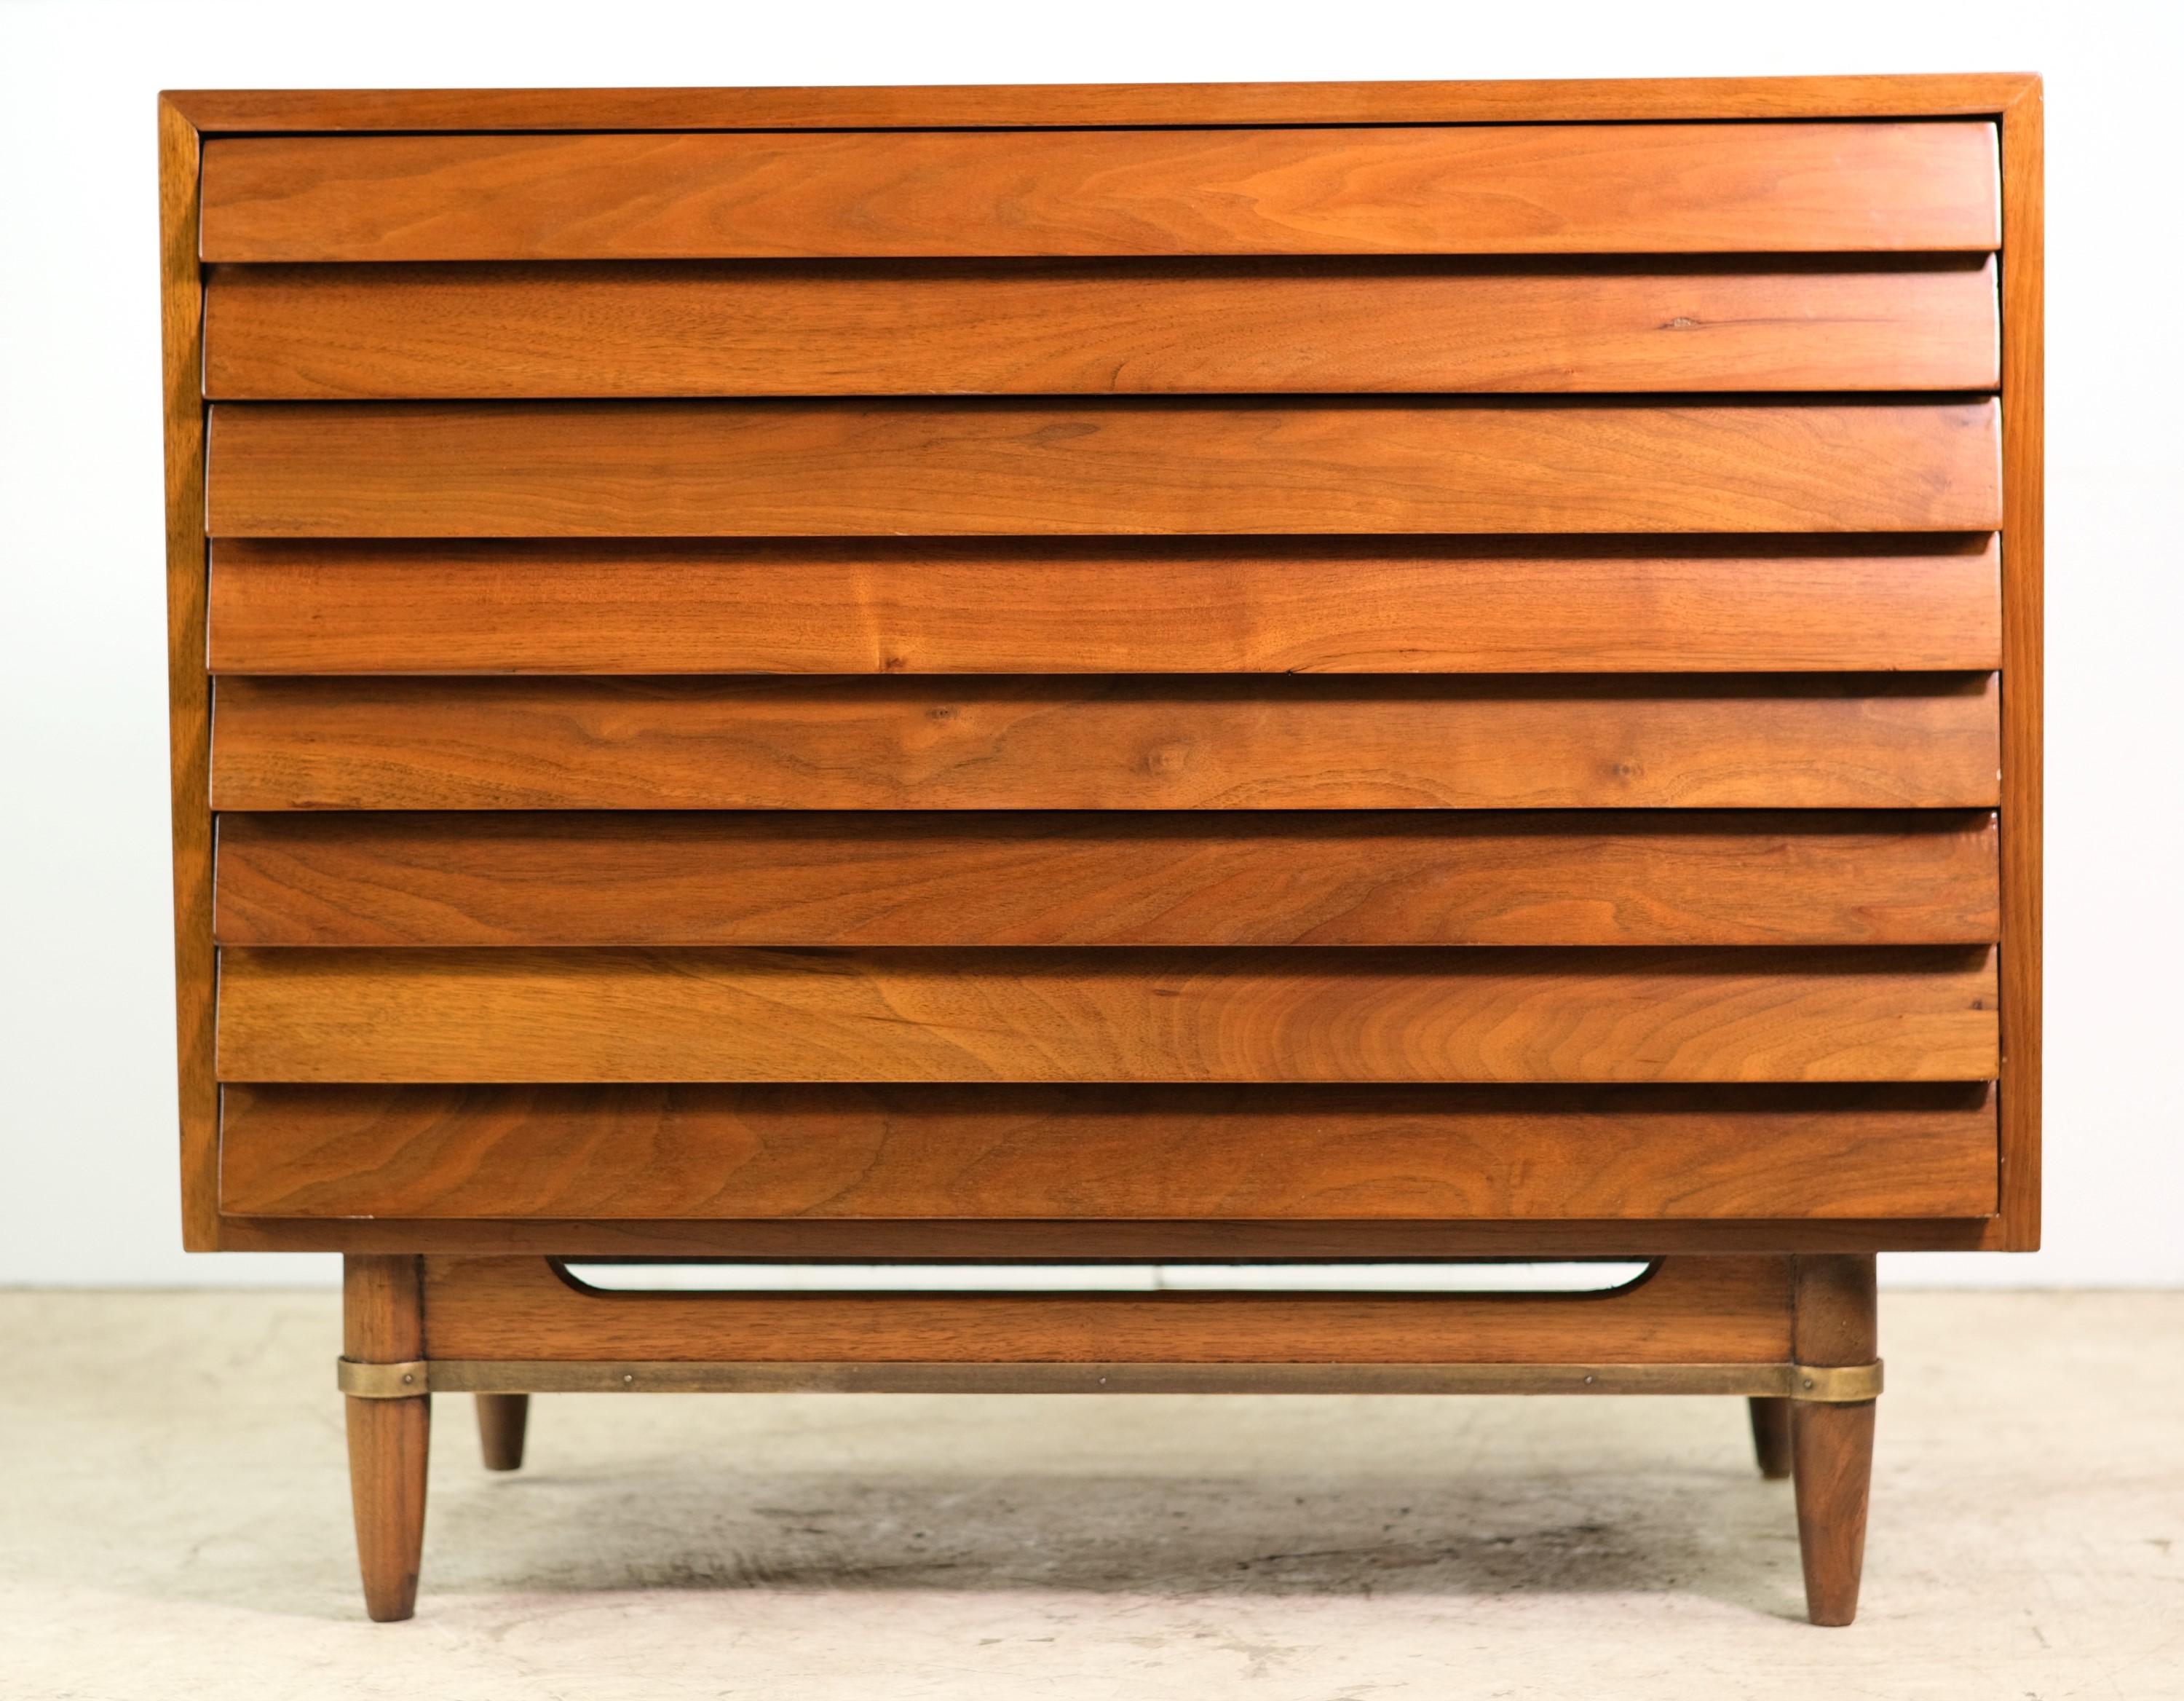 Mid-Century Modern three drawer credenza made of solid walnut with louvered front doors. It has dovetailed drawers with an oak interior and turned legs with a brass detailed base. Made by American Martinsville. It is well preserved for its age. This